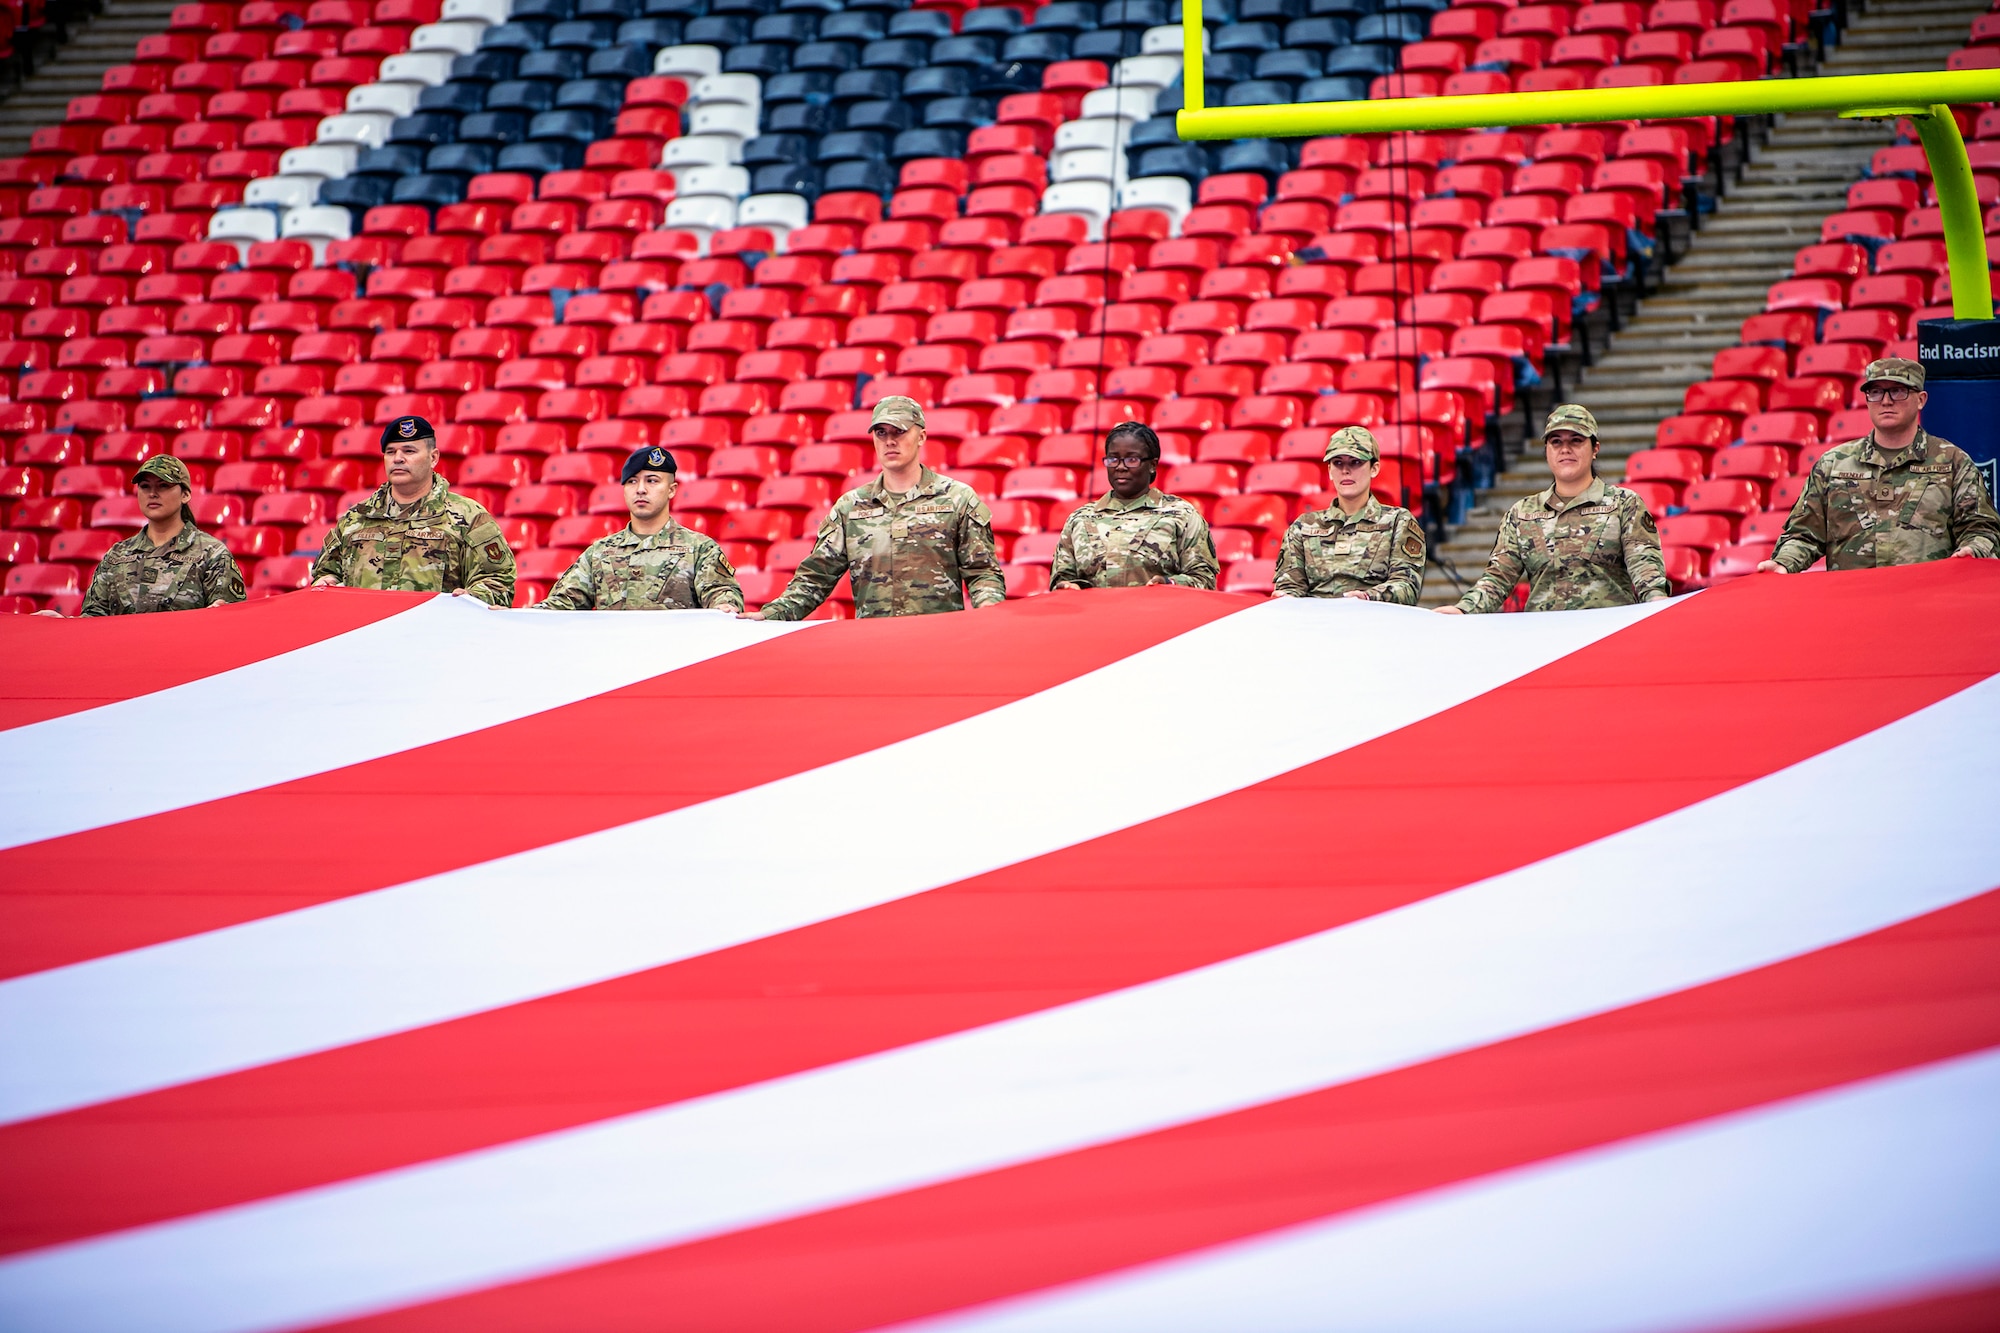 Airmen from the 501st Combat Support Wing rehearse unveiling an American flag at Wembley Stadium, in London, England, Oct. 30, 2022. Approximately 70 uniformed personnel represented the U.S. Air Force and nation by unveiling an American flag during the pre-game ceremonies of the Jacksonville Jaguars and. Denver Broncos NFL game. (U.S. Air Force photo by Staff Sgt. Eugene Oliver)